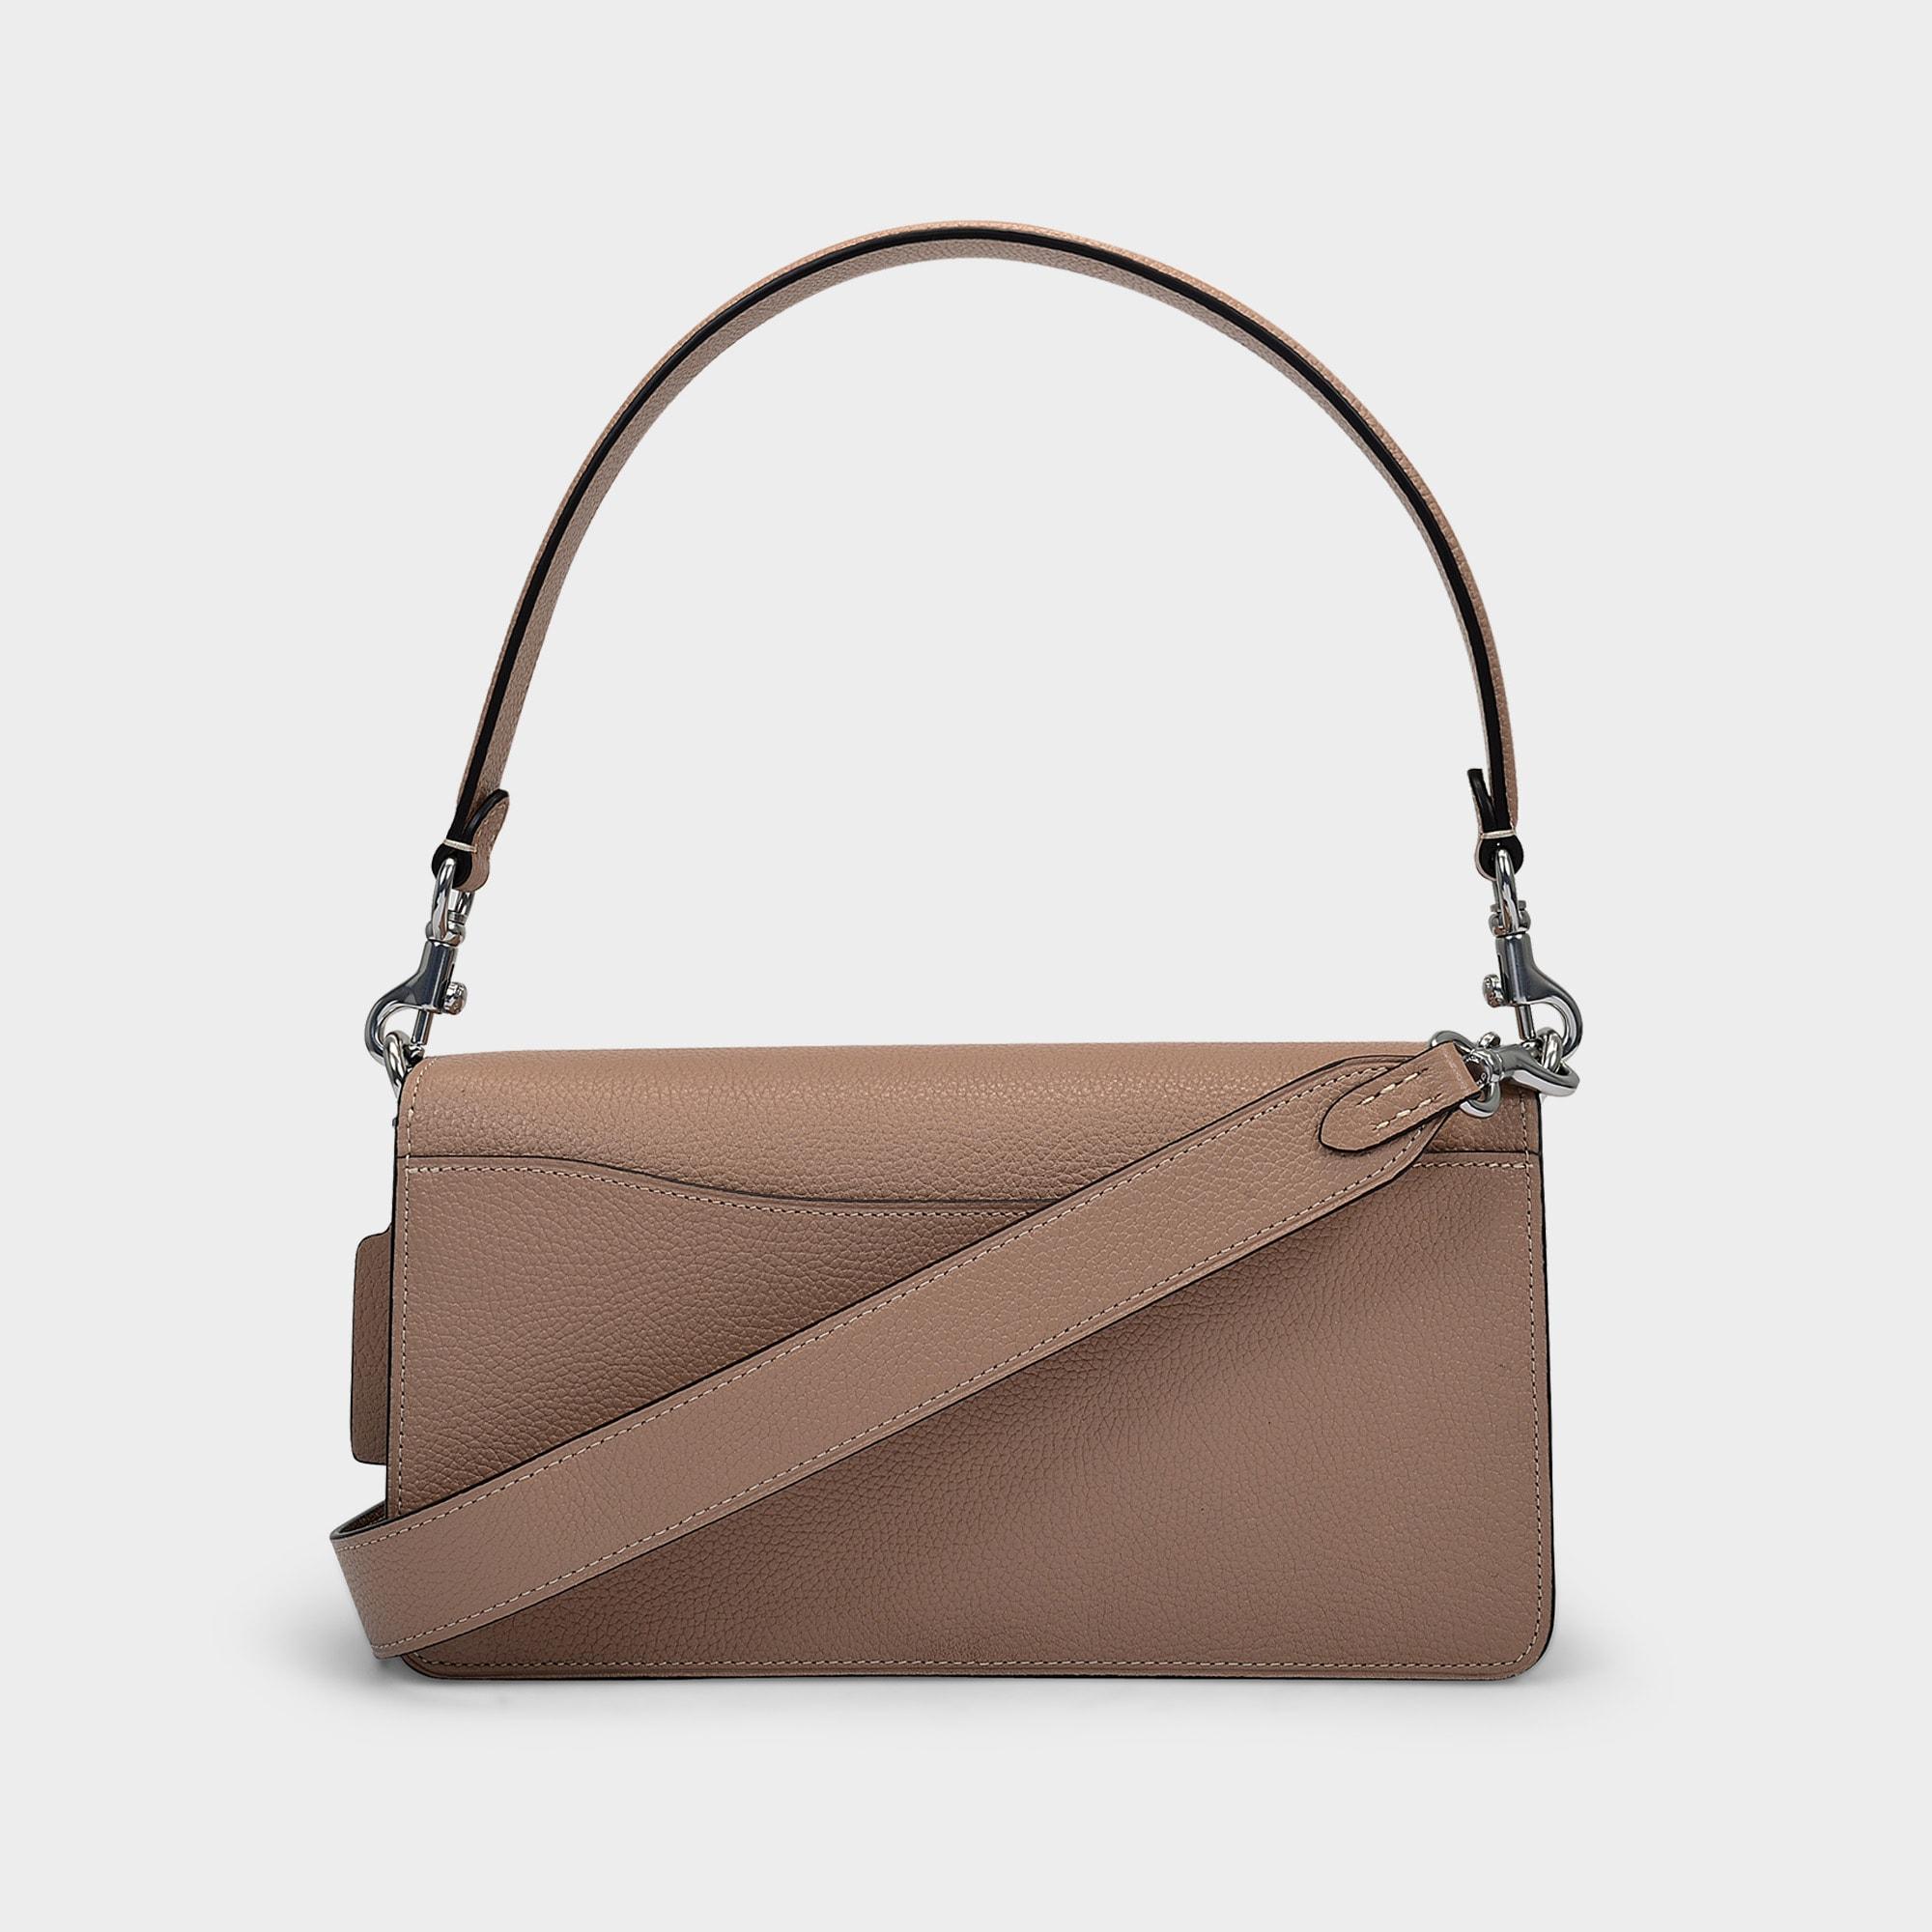 COACH Tabby 26 Shoulder Bag In Taupe Leather in Brown (Natural) - Lyst